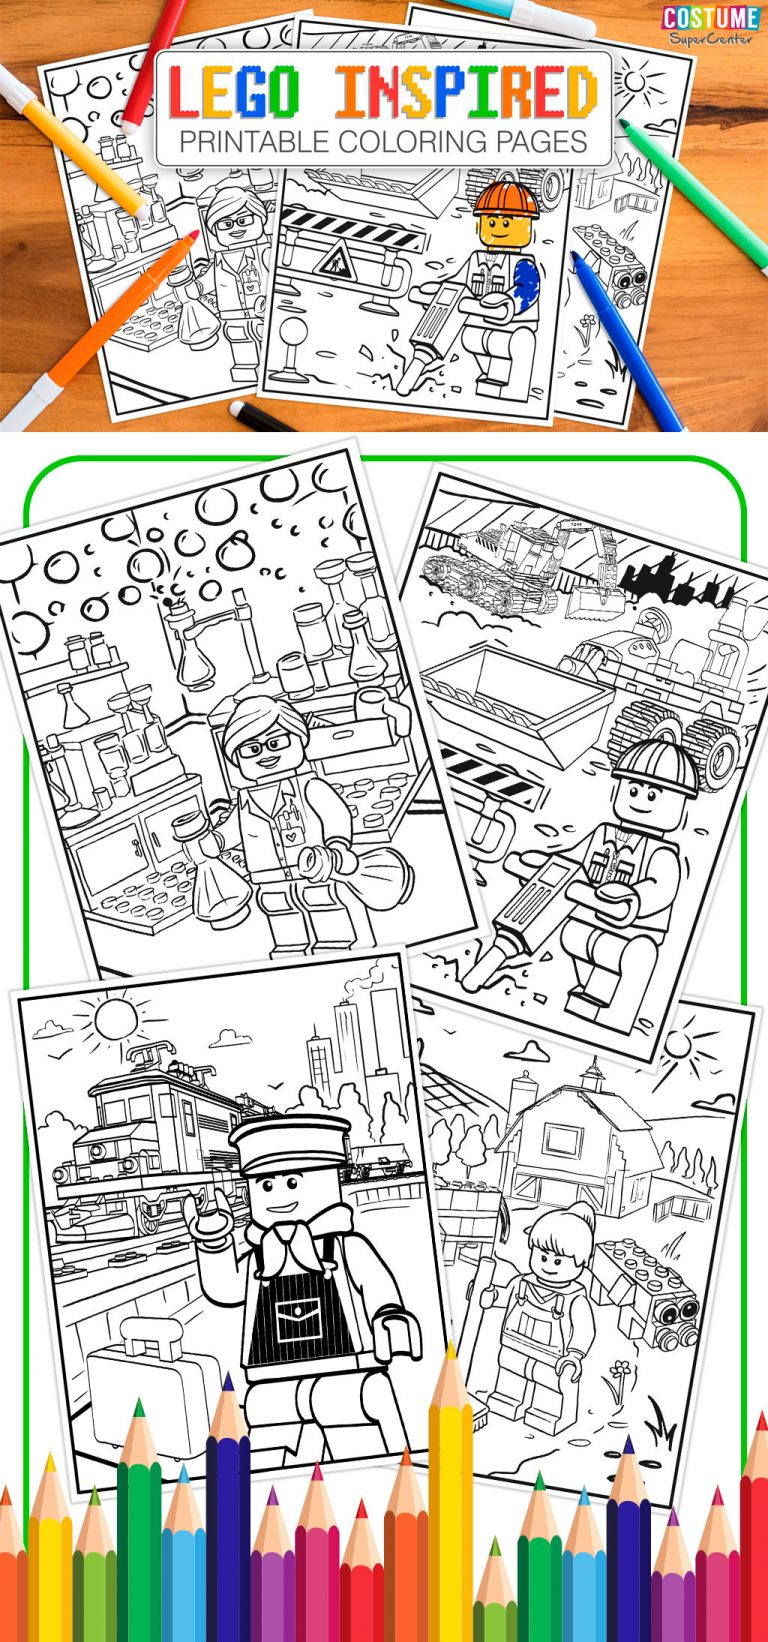 Lego inspired printable coloring pages